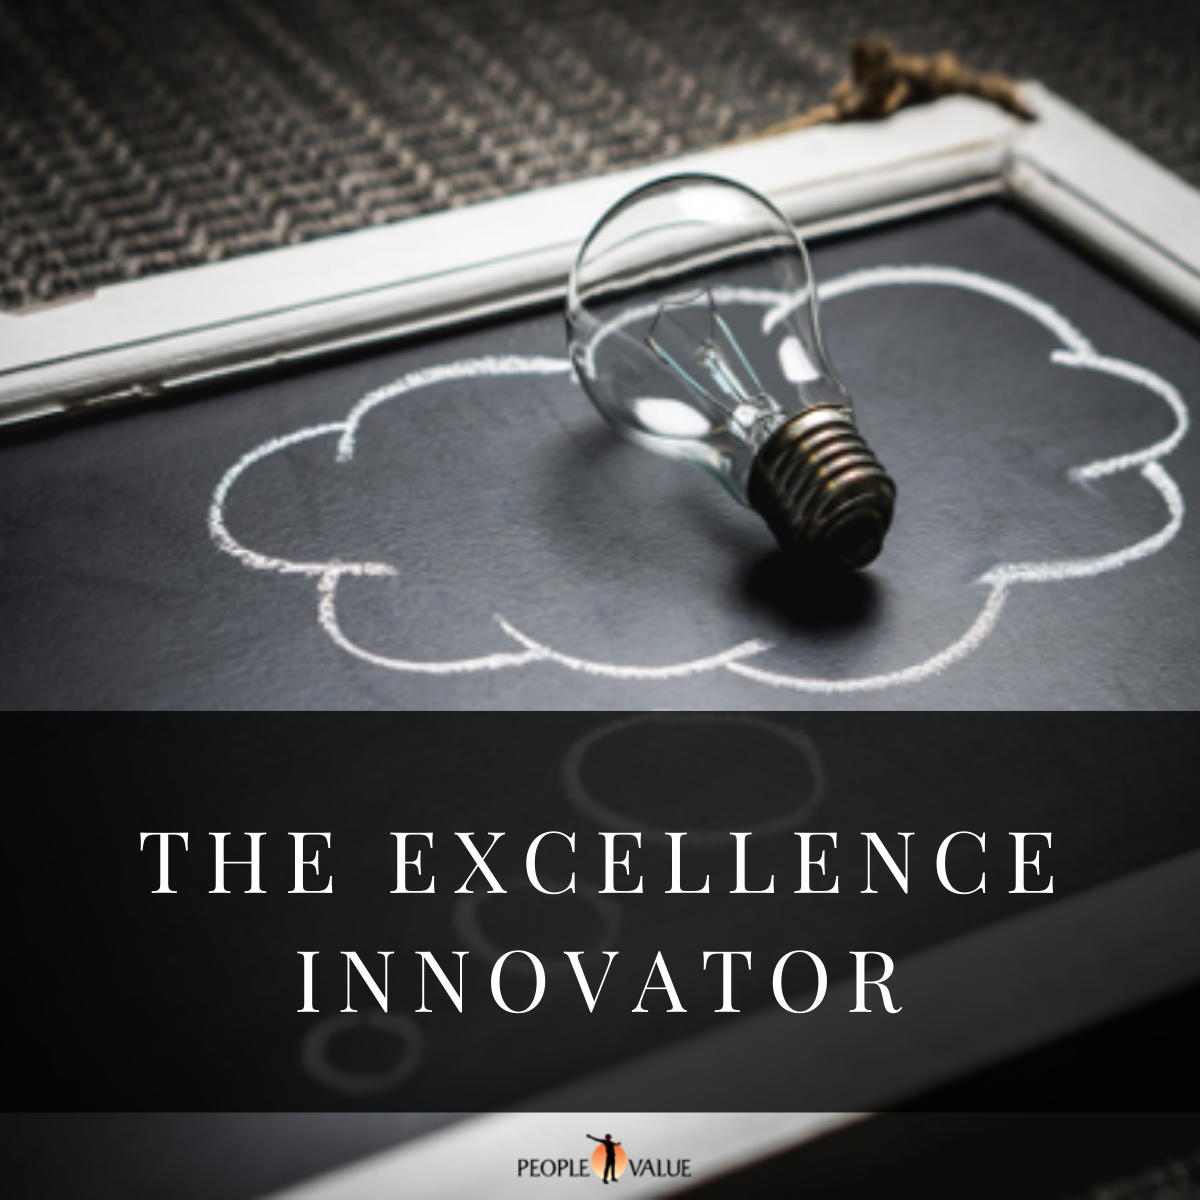 The Excellence Innovator